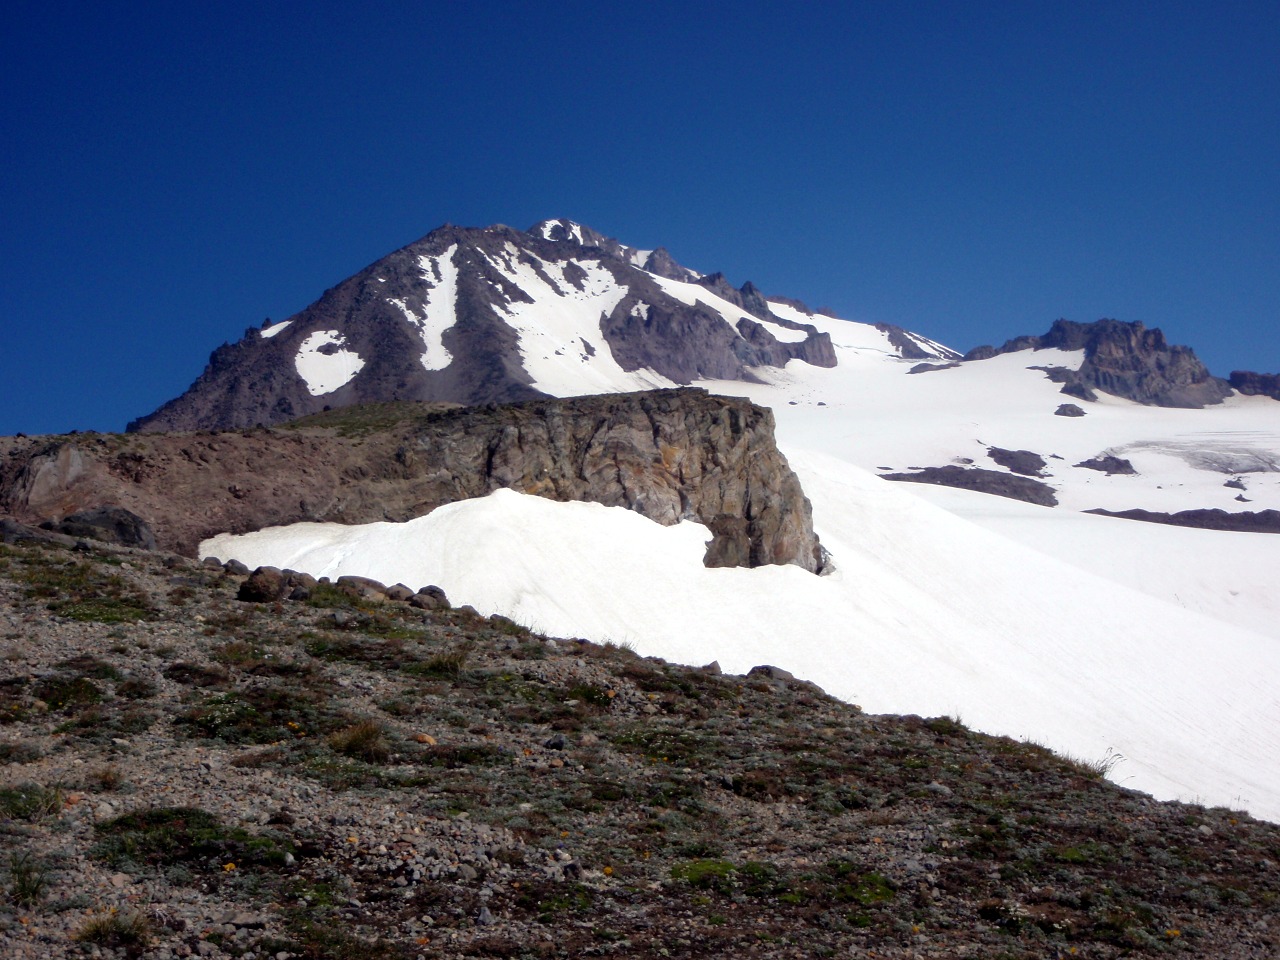 Disappointment Peak and the Gerdine Glaciers